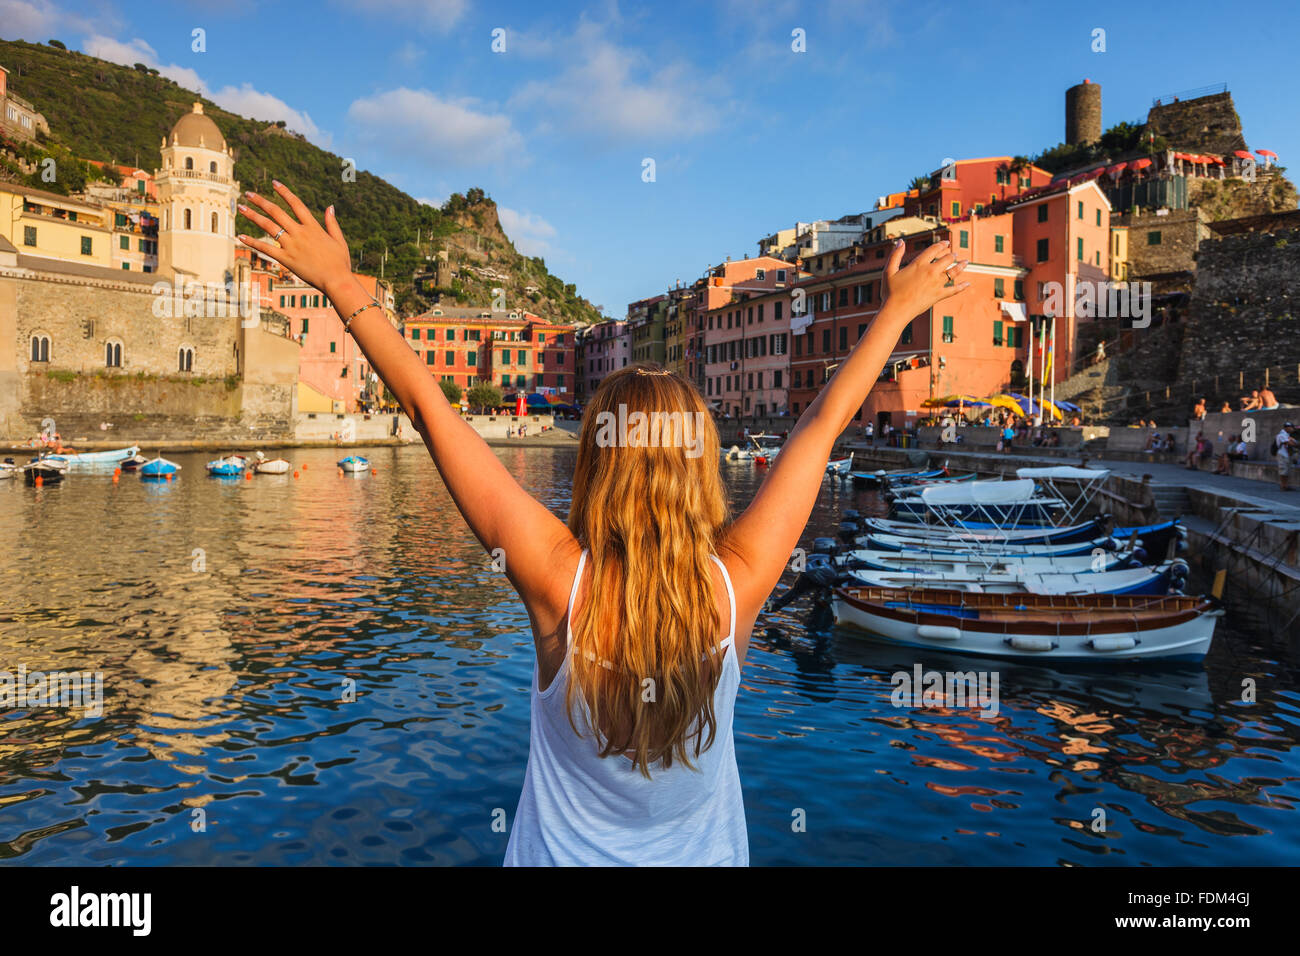 A young Caucasian woman relaxing with the view of Vernazza, Cinque Terre (Five Lands) National Park, Liguria, Italy. Stock Photo